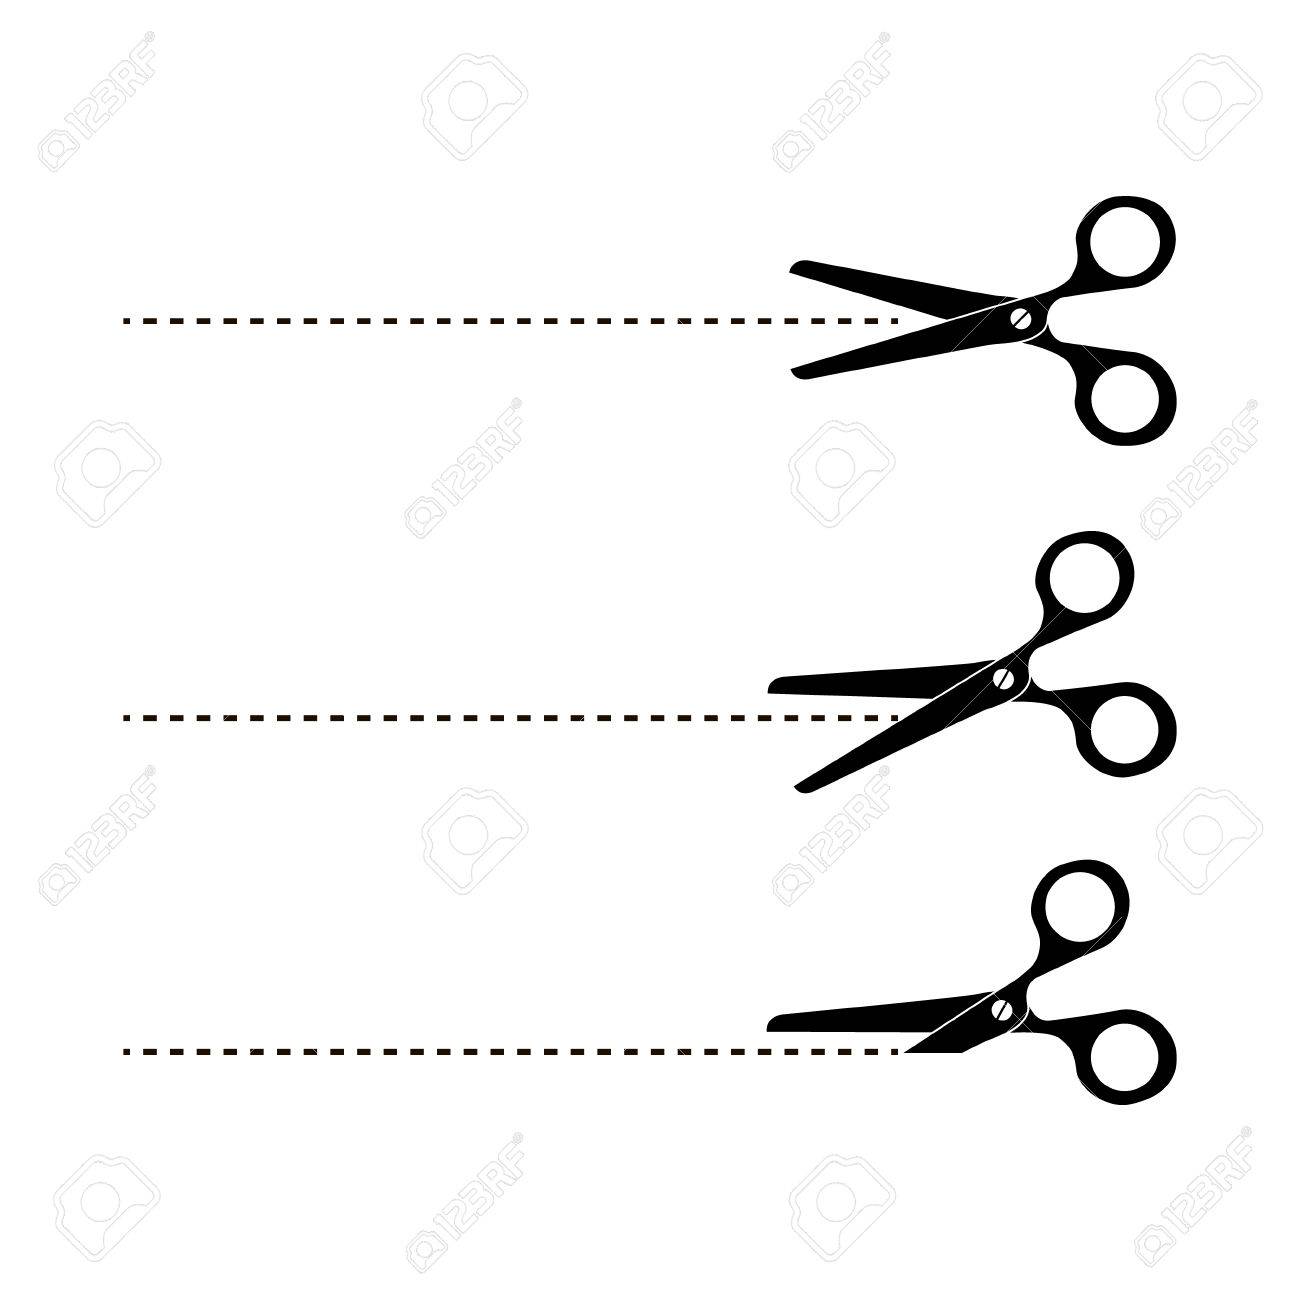 Free Scissor Clipart dotted line, Download Free Clip Art on